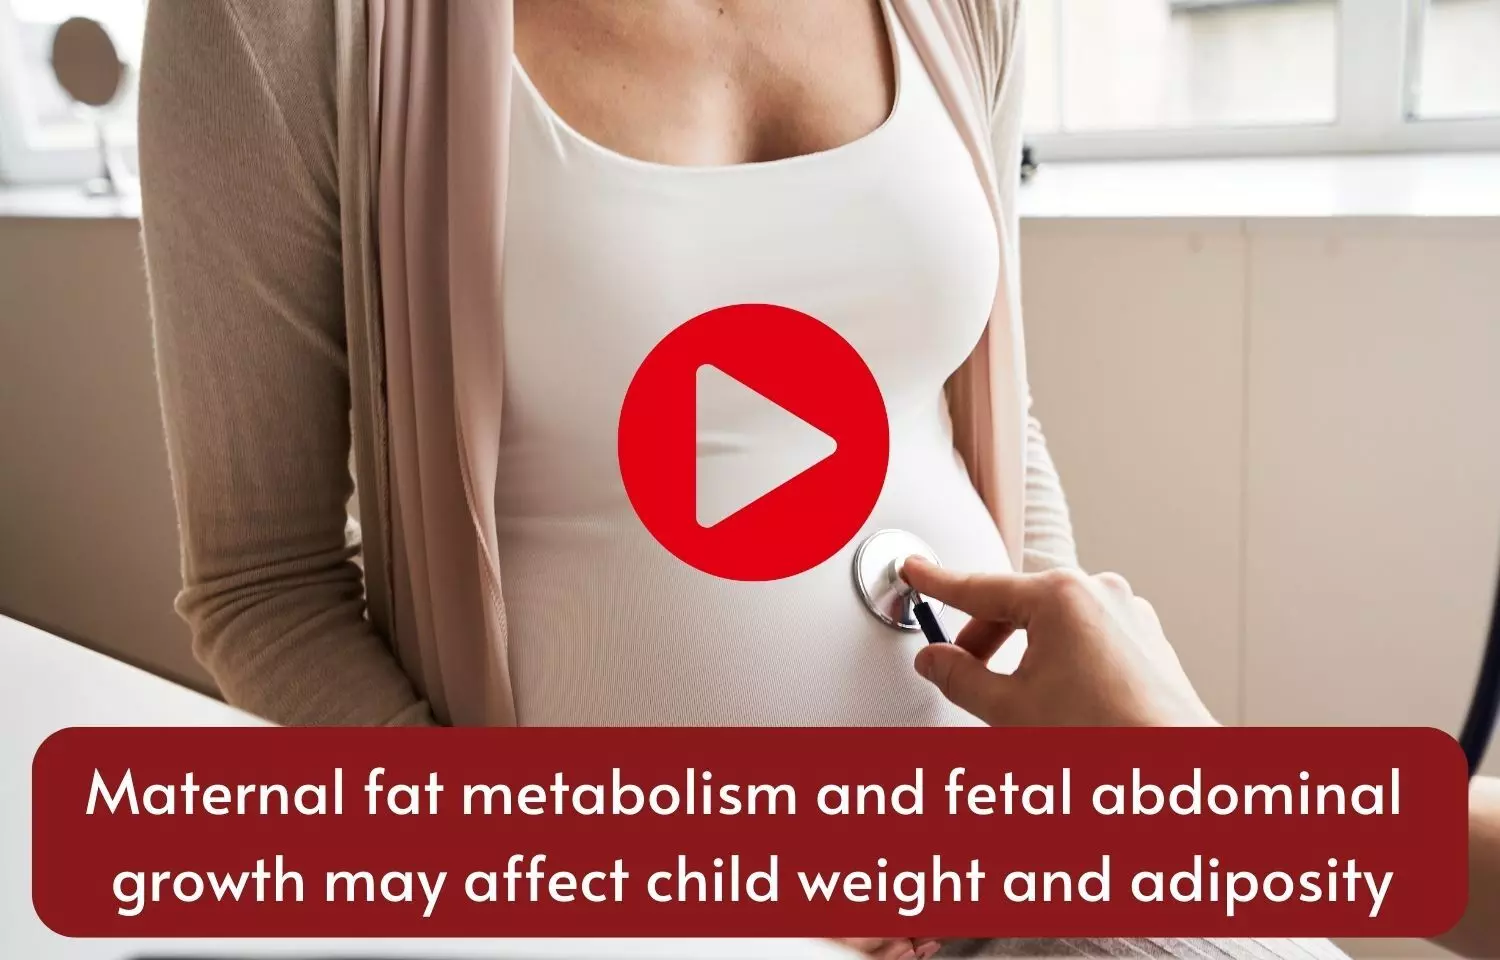 Maternal fat metabolism and fetal abdominal growth may affect child weight and adiposity